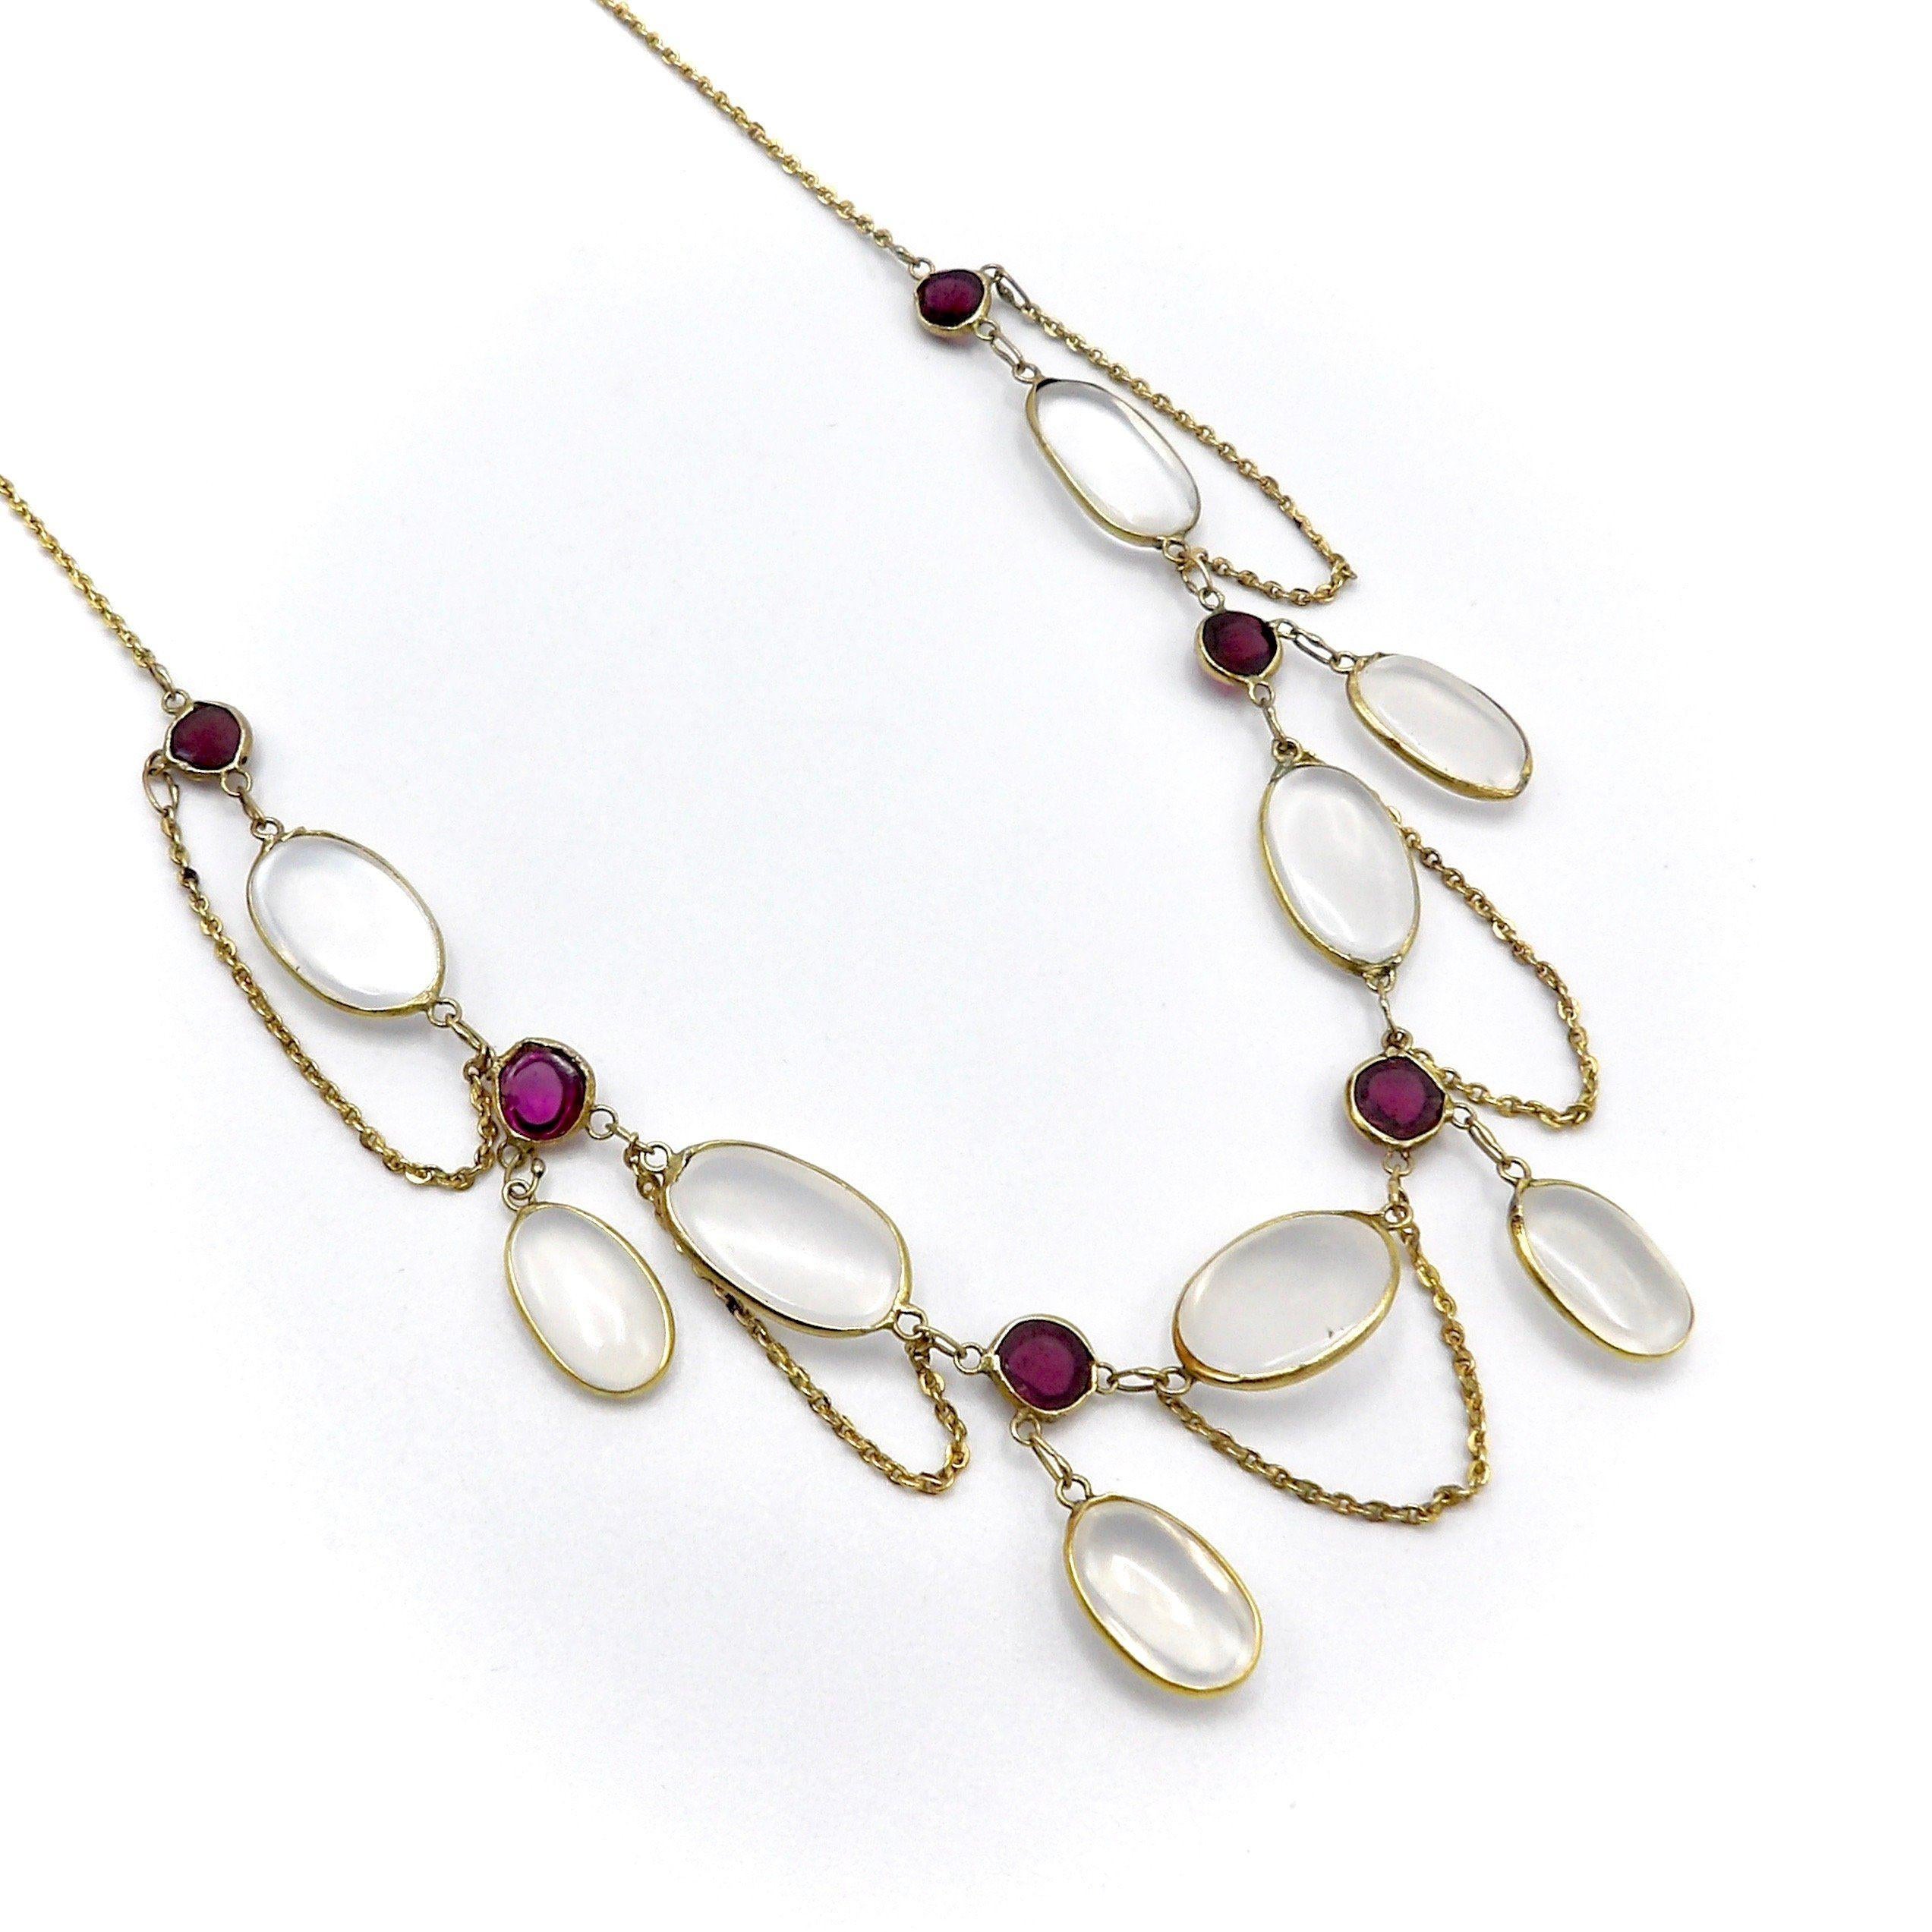 This gorgeous festoon necklace has a soft and delicate arrangement of moonstone and garnet cabochons, favorites of the Edwardian era. Feminine and romantic, the necklace drapes to create gorgeous curved lines around the neck. Five oval moonstone